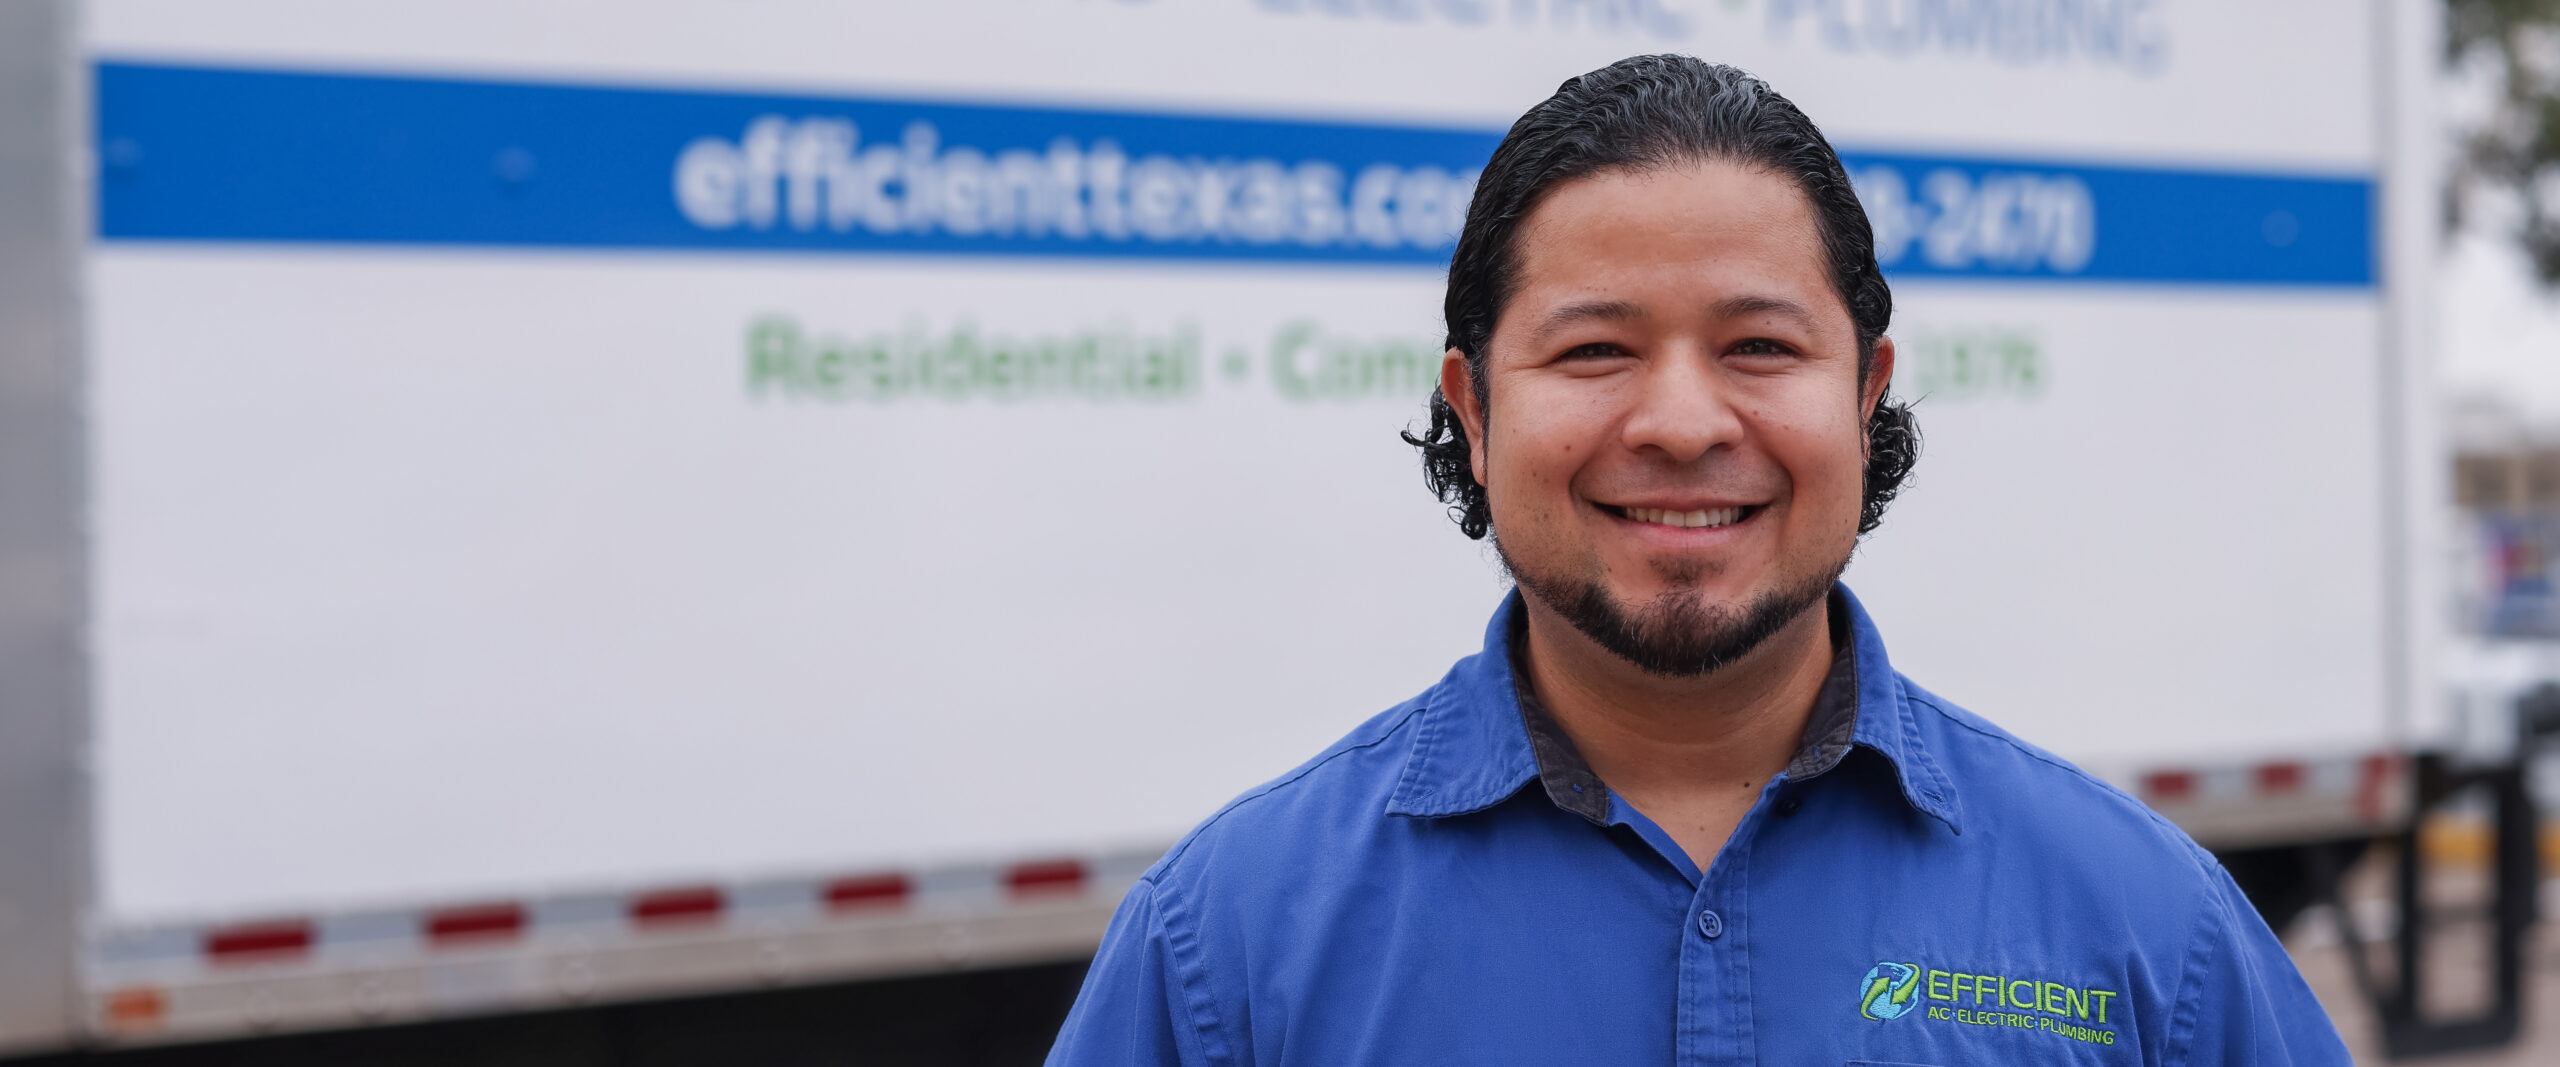 efficient ac electric & plumbing HVAC technician smiling in a blue work shirt standing in front of white work truck in austin tx